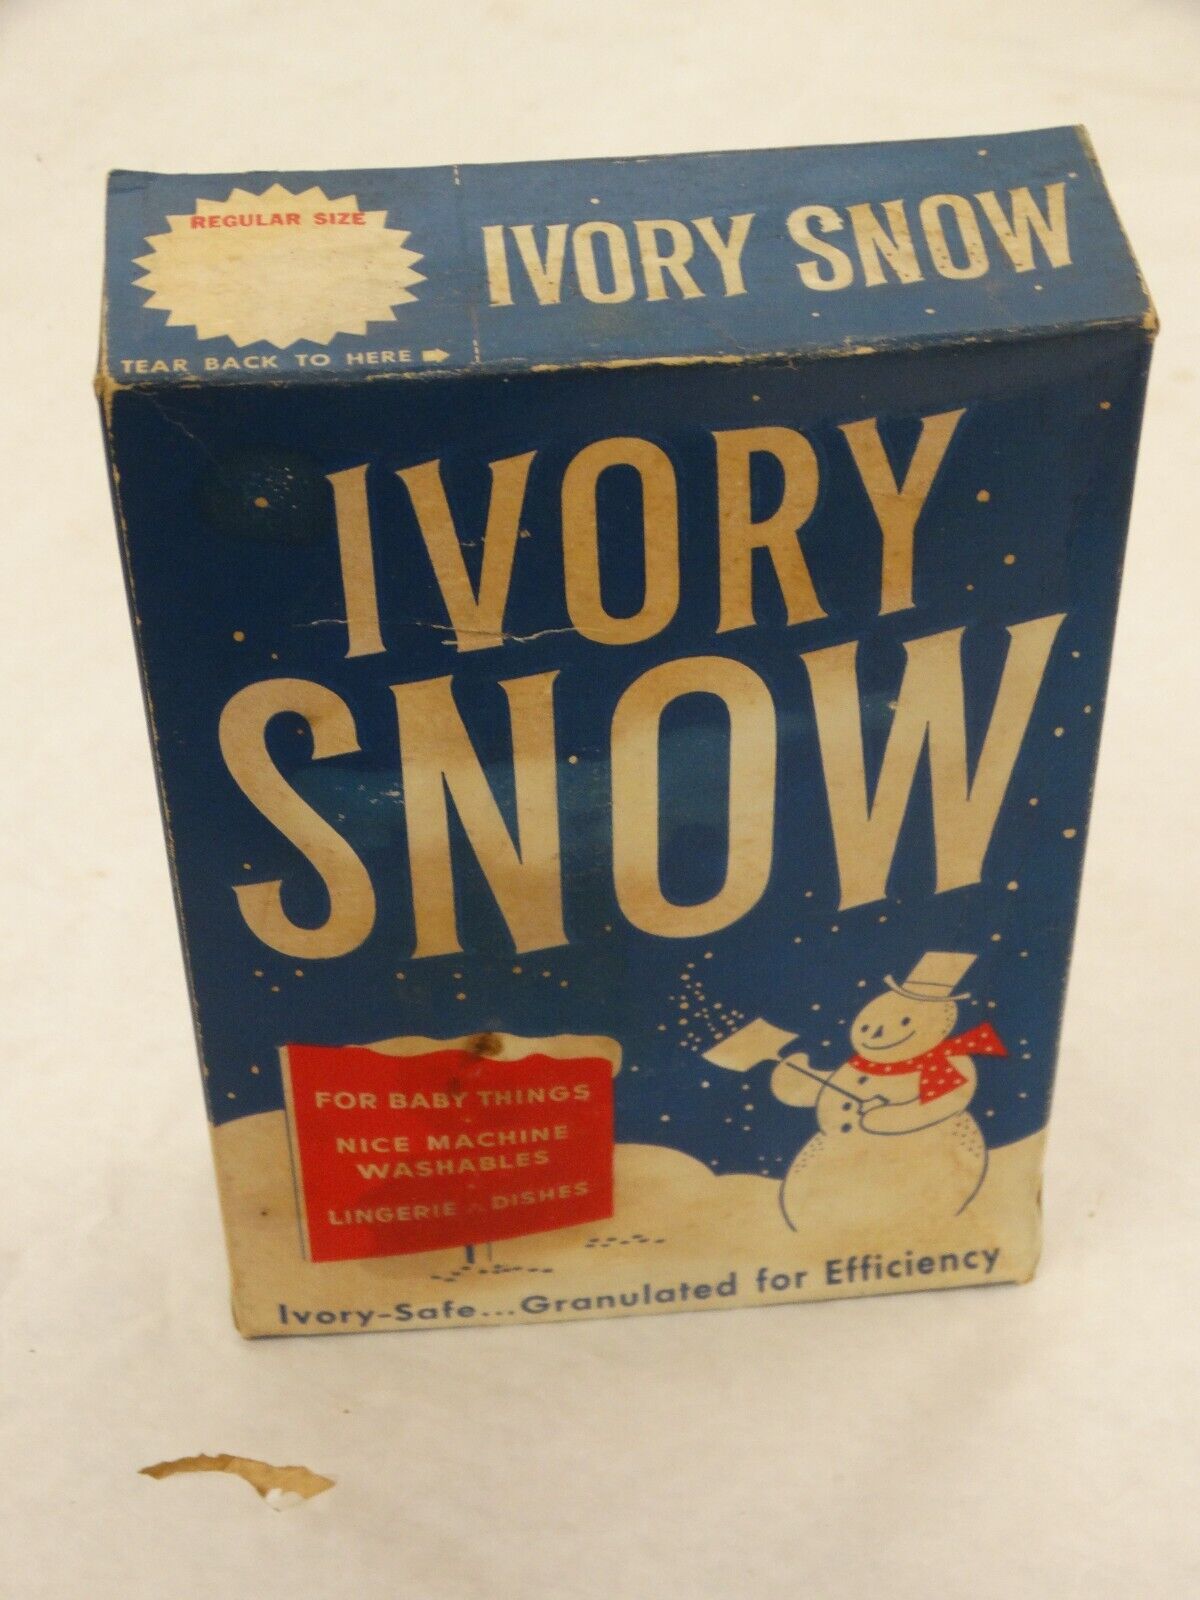 Vintage Ivory Snow Granulated Laundry Detergent - Proctor & Gamble - Snowman